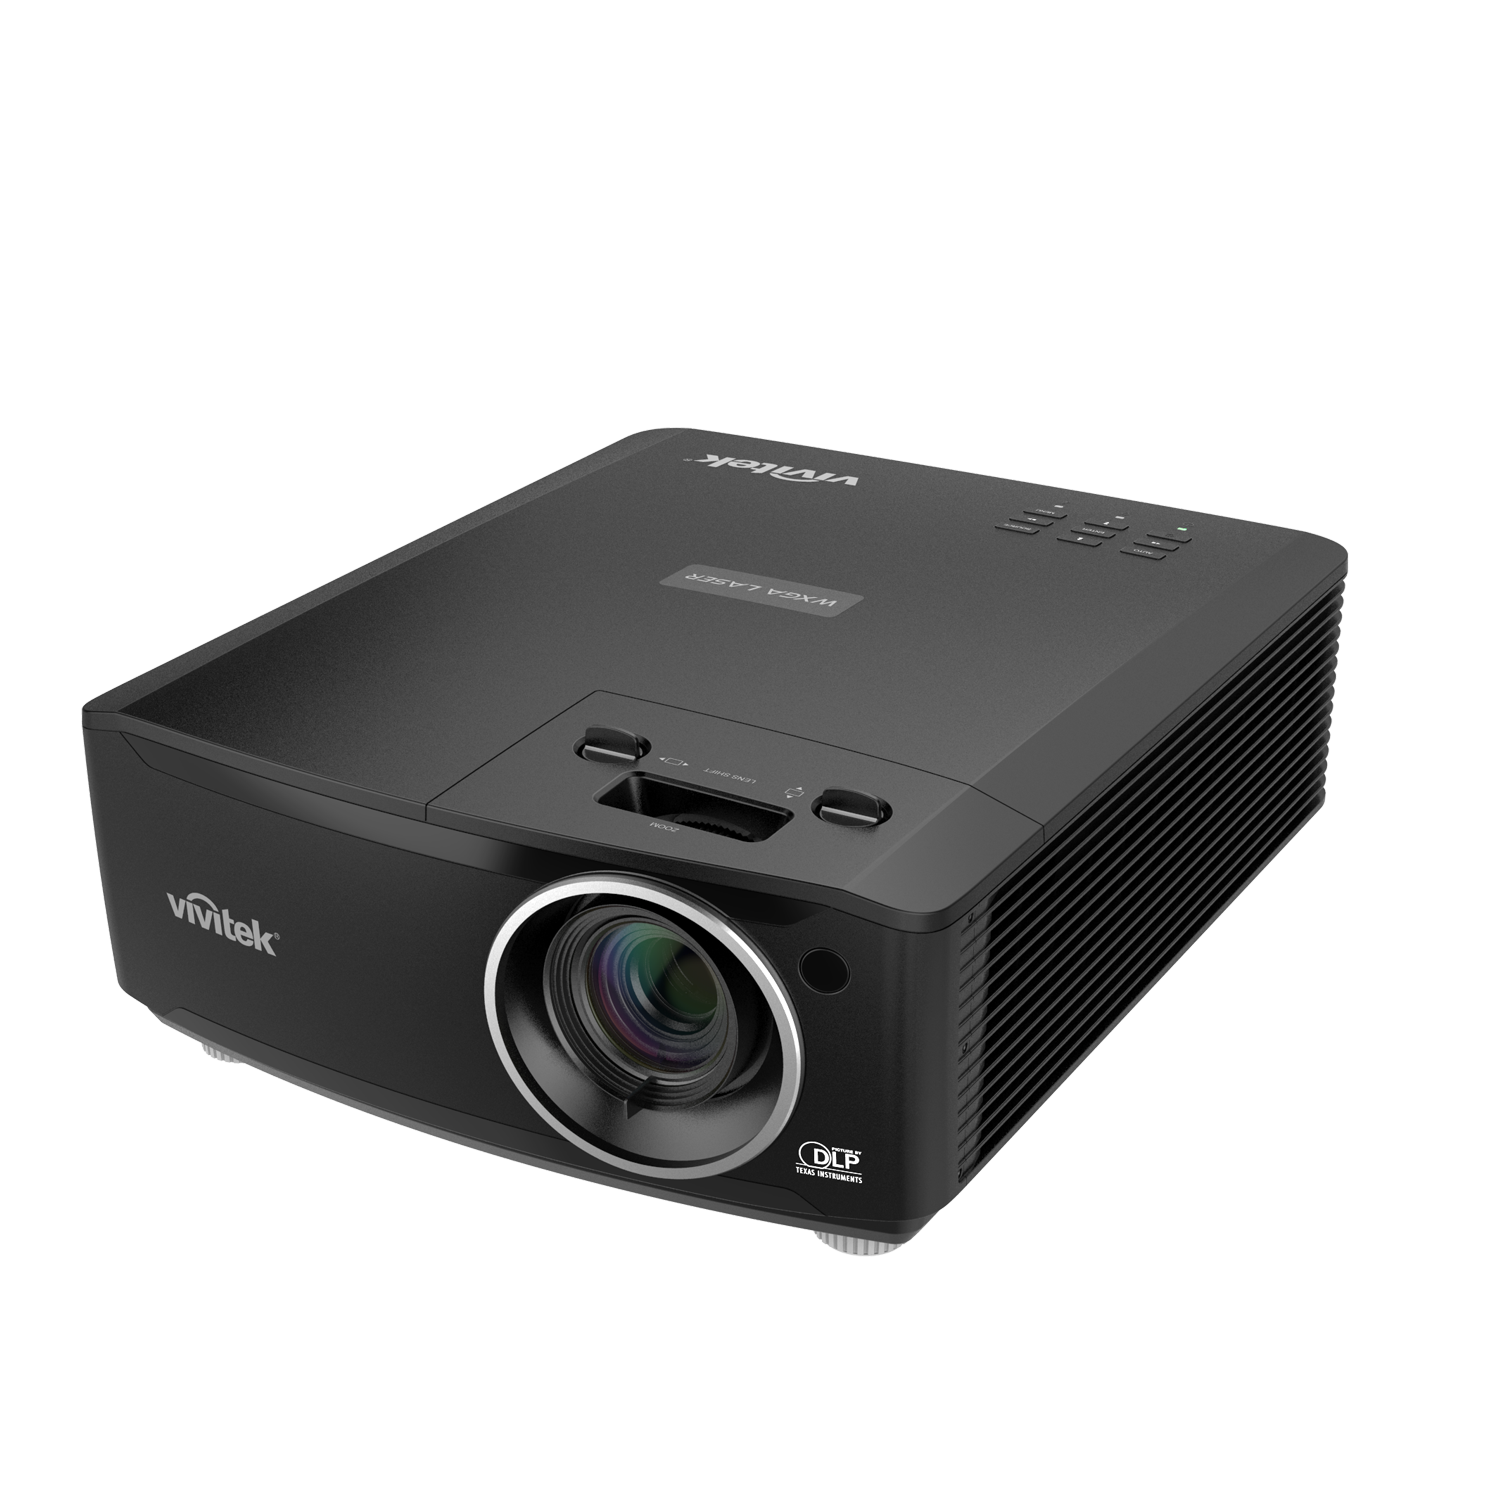 Sanwa Supply launches a micro projector for iPhone 4 and 4S